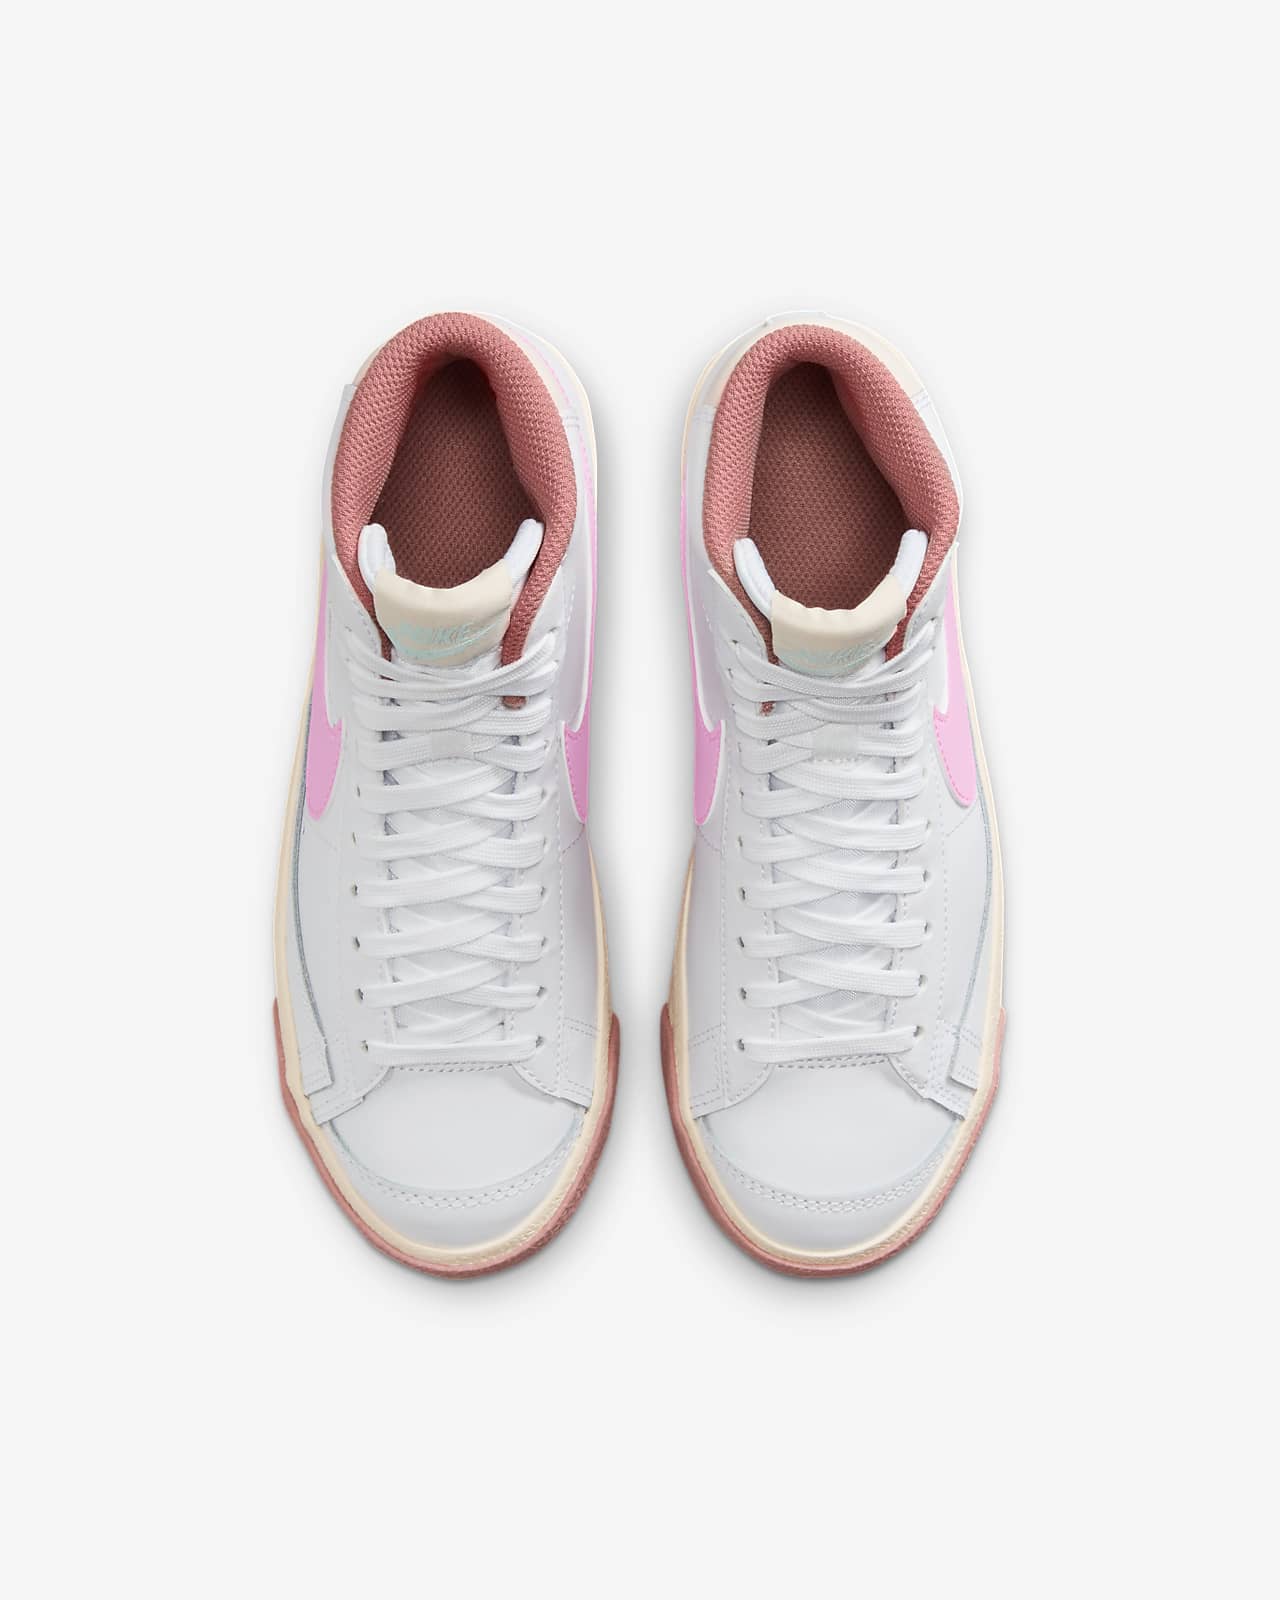 Nike Blazer Mid '77 Big Kids' Shoes in White, Size: 3.5Y | FN6966-100